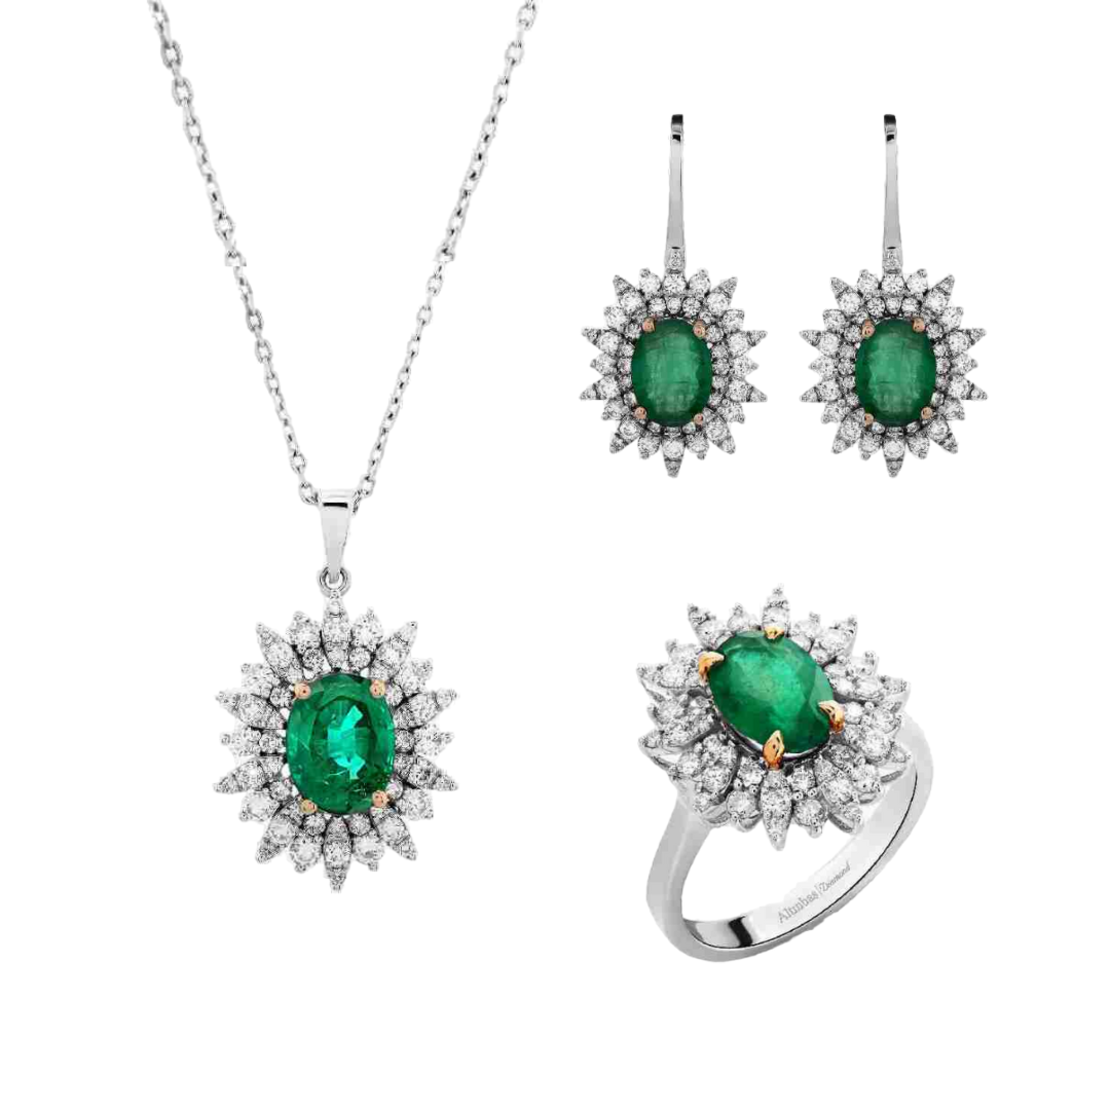 5.00 ct Set with diamonds and emeralds